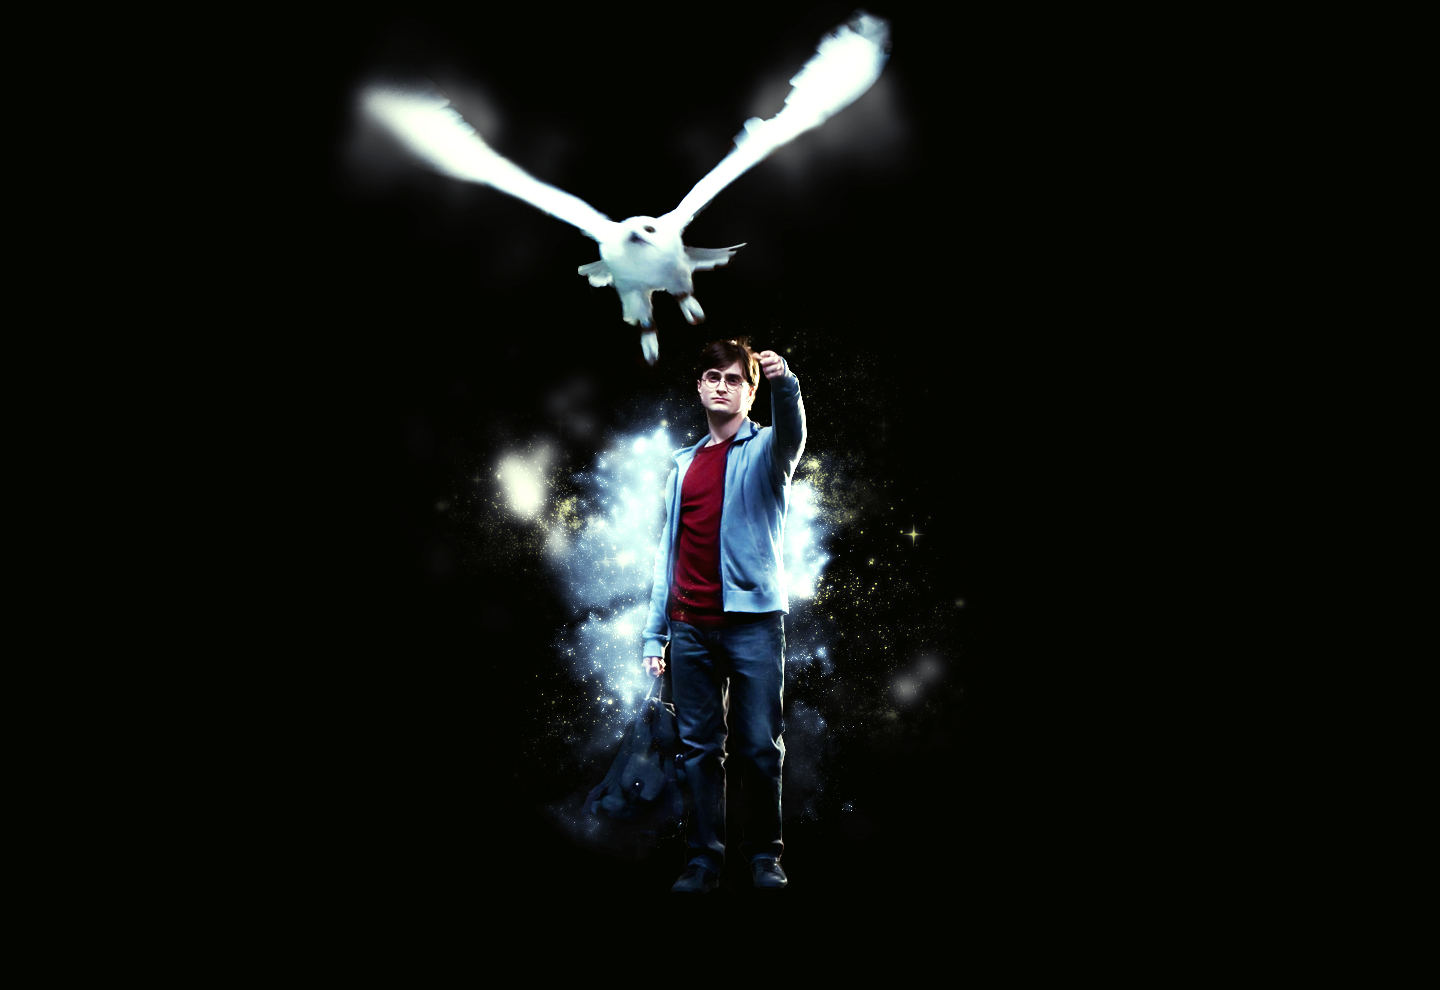 harry potter, movie, harry potter and the deathly hallows: part 1, daniel radcliffe, owl Ultra HD, Free 4K, 32K